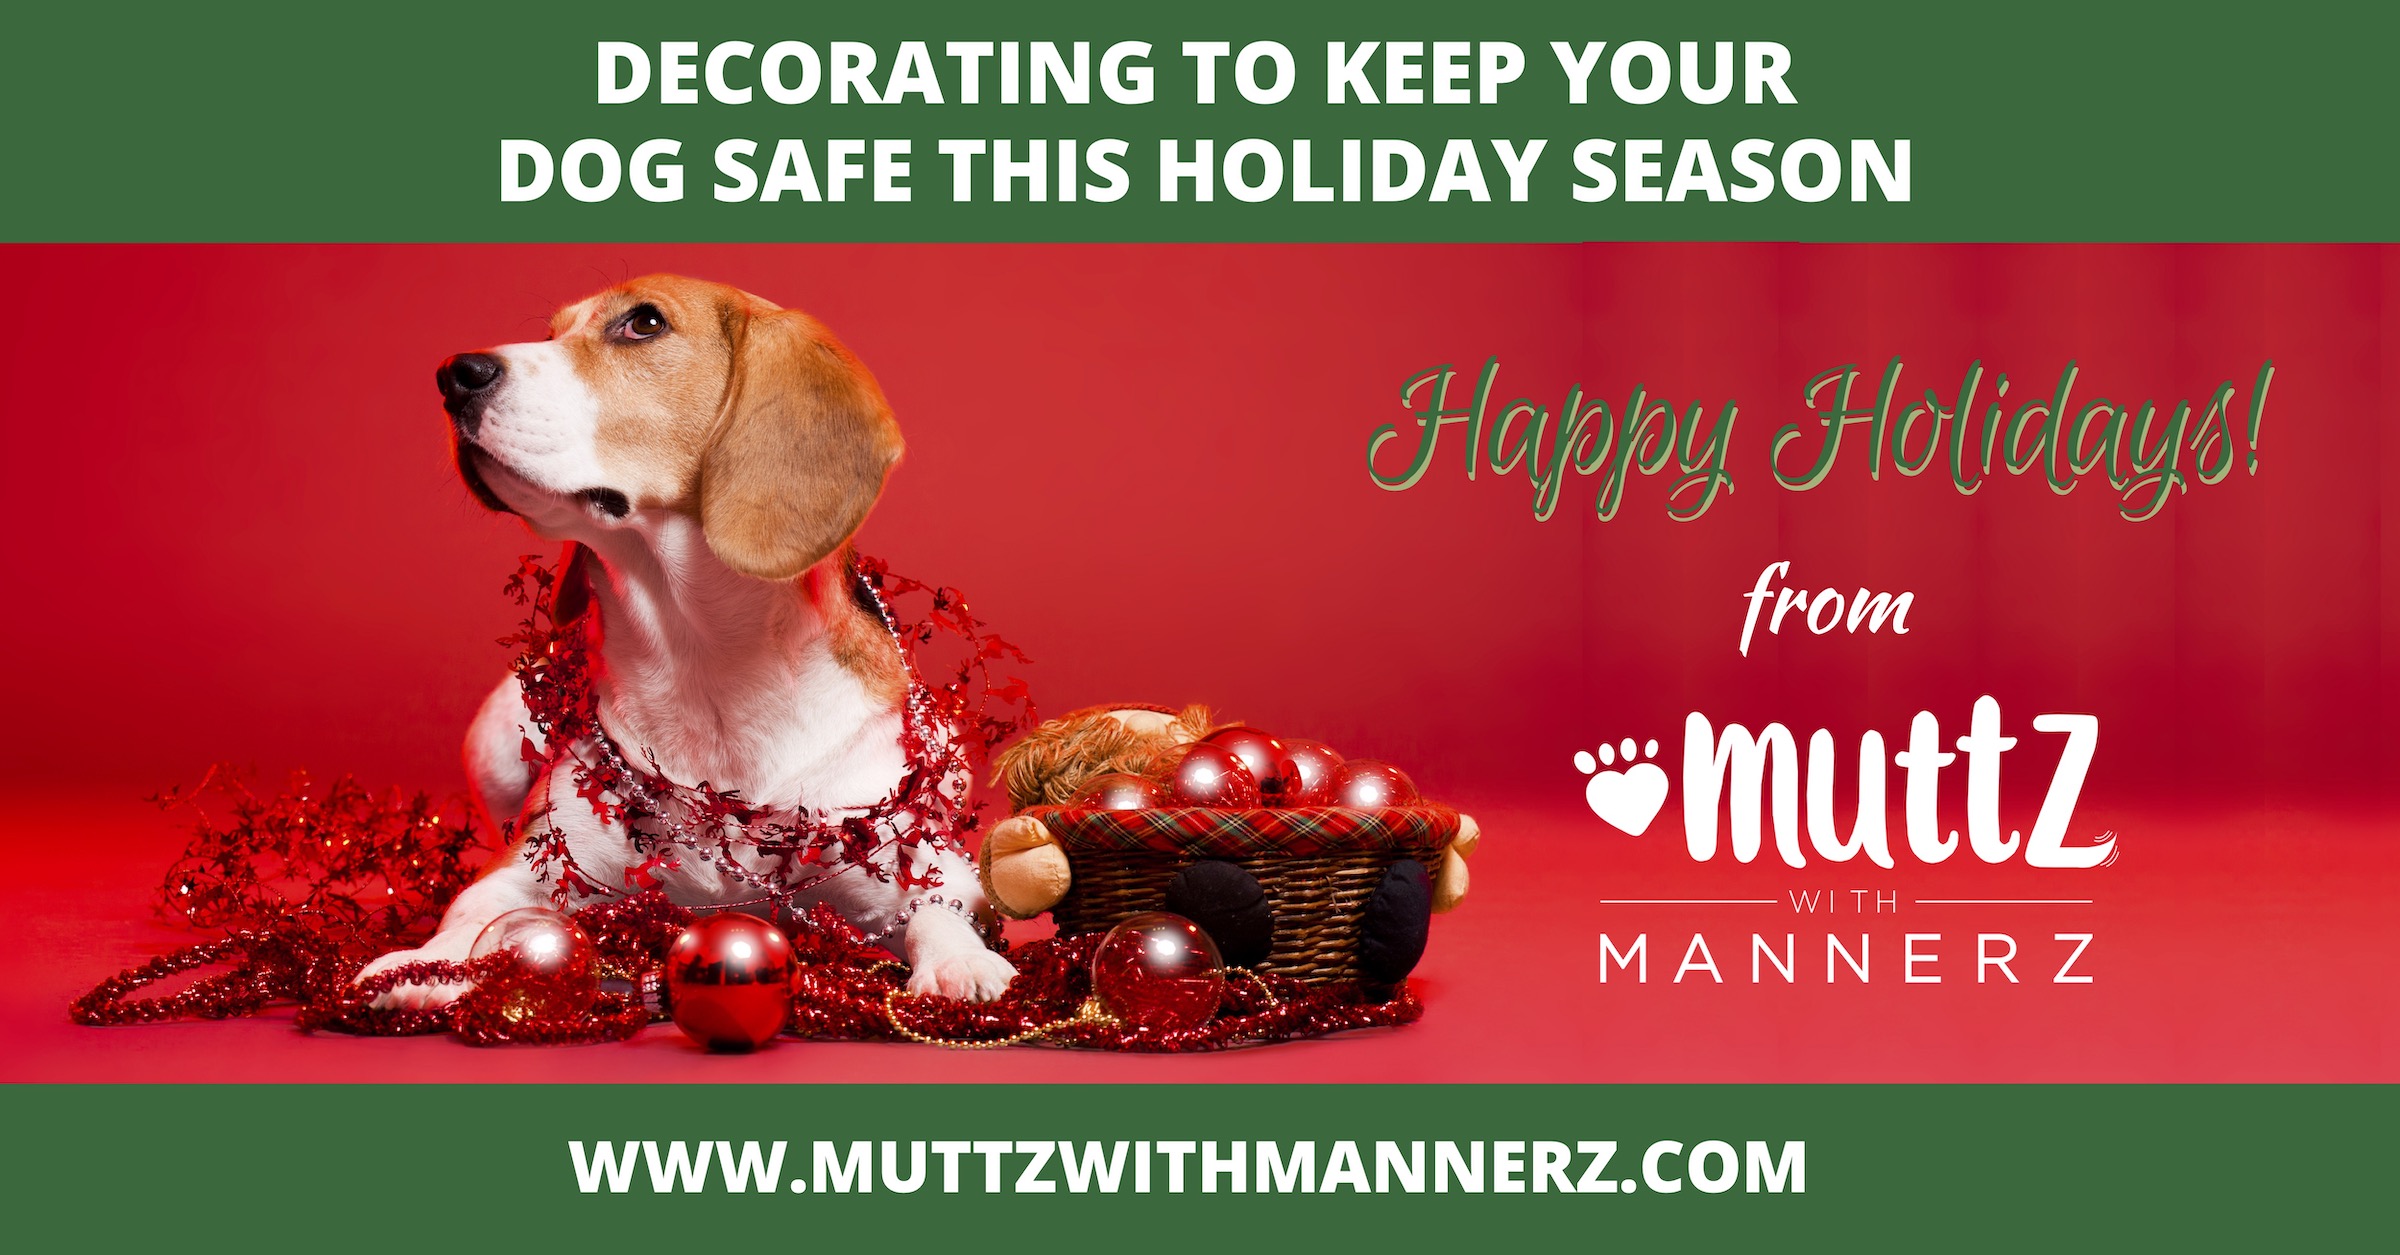 Decorating to Keep Your Dog Safe this Holiday Season